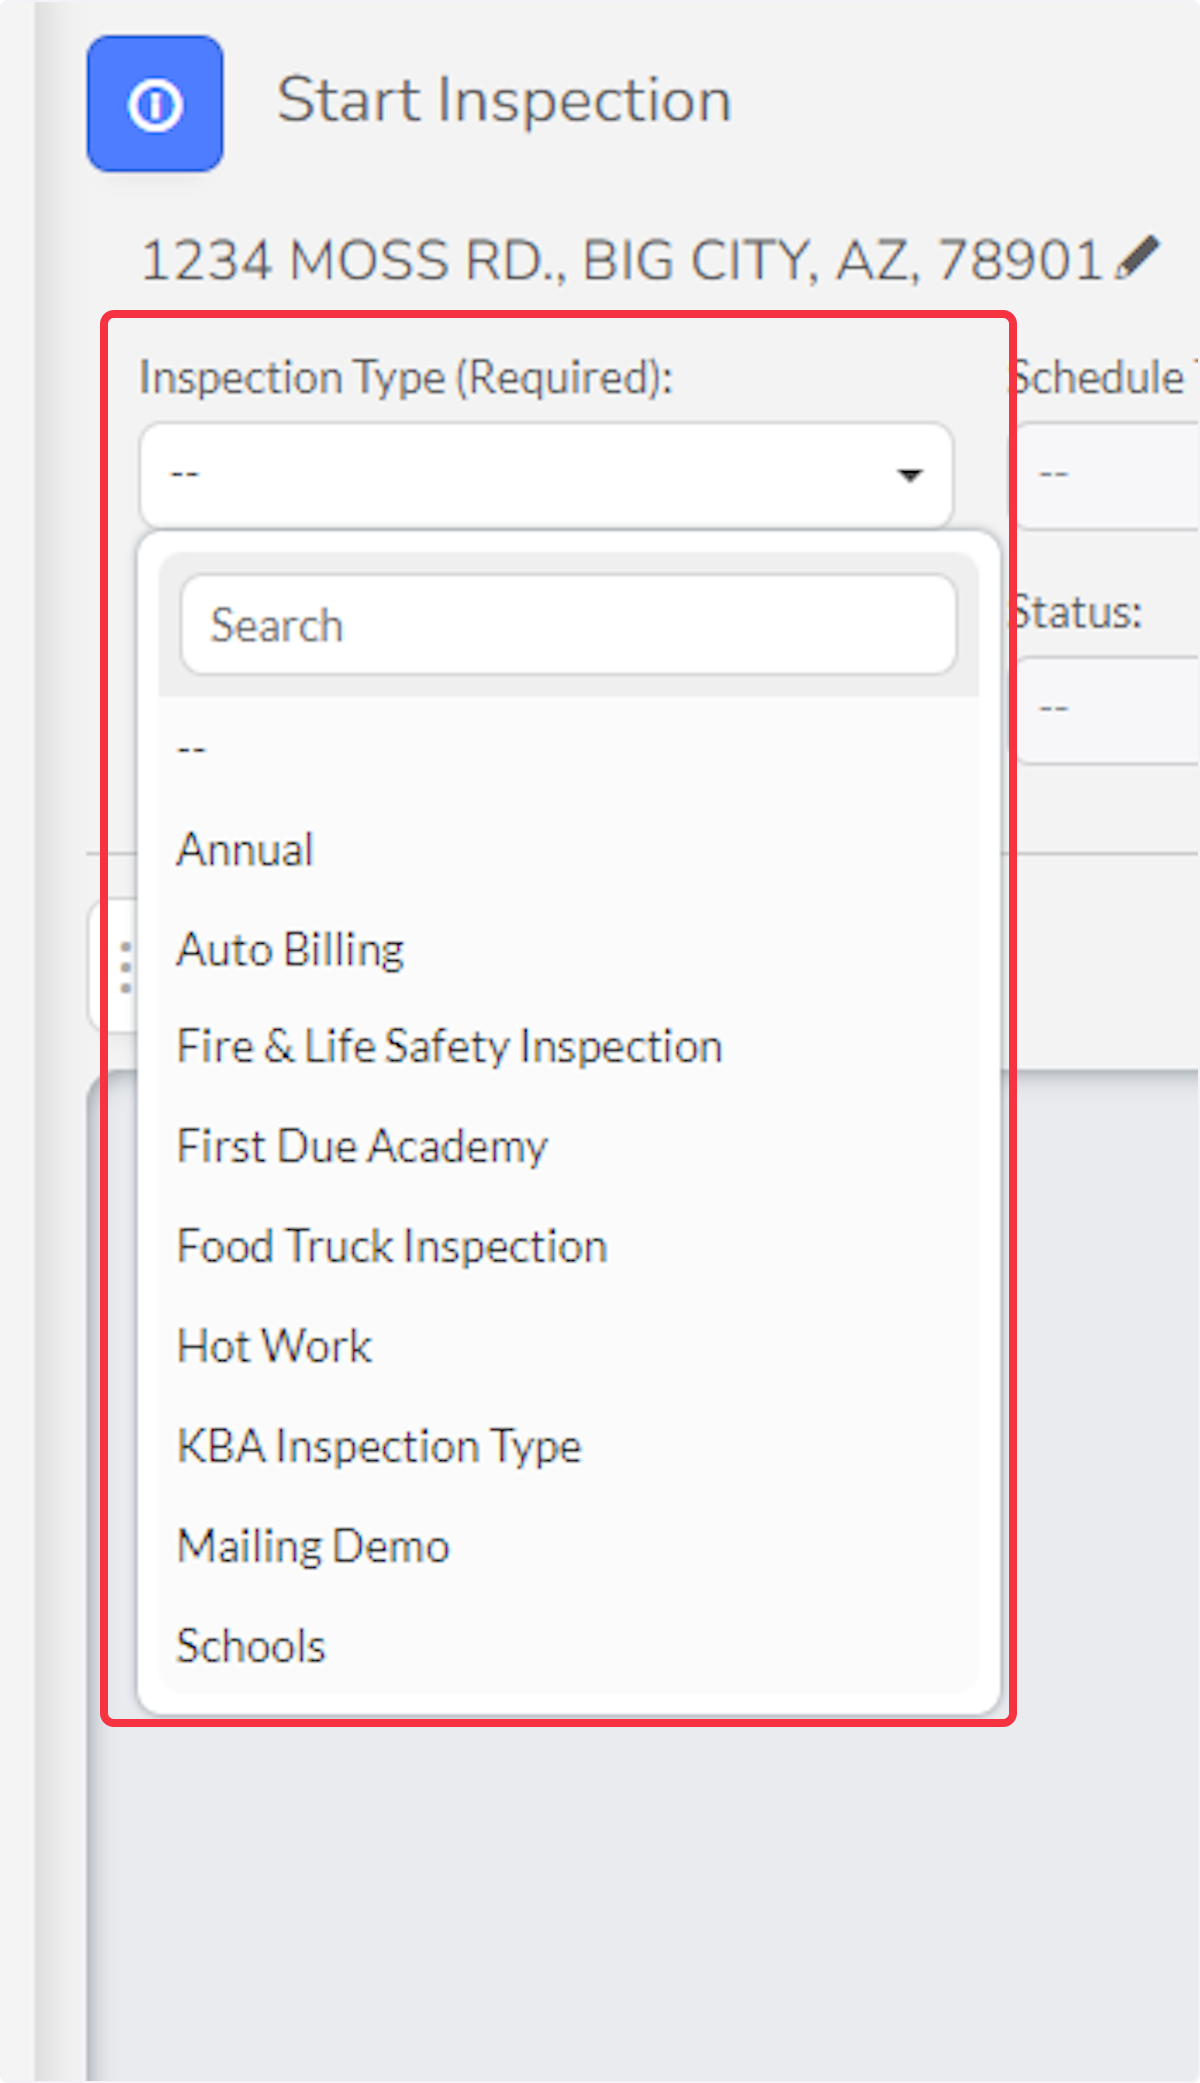 Select an Inspection Type from the drop down menu.